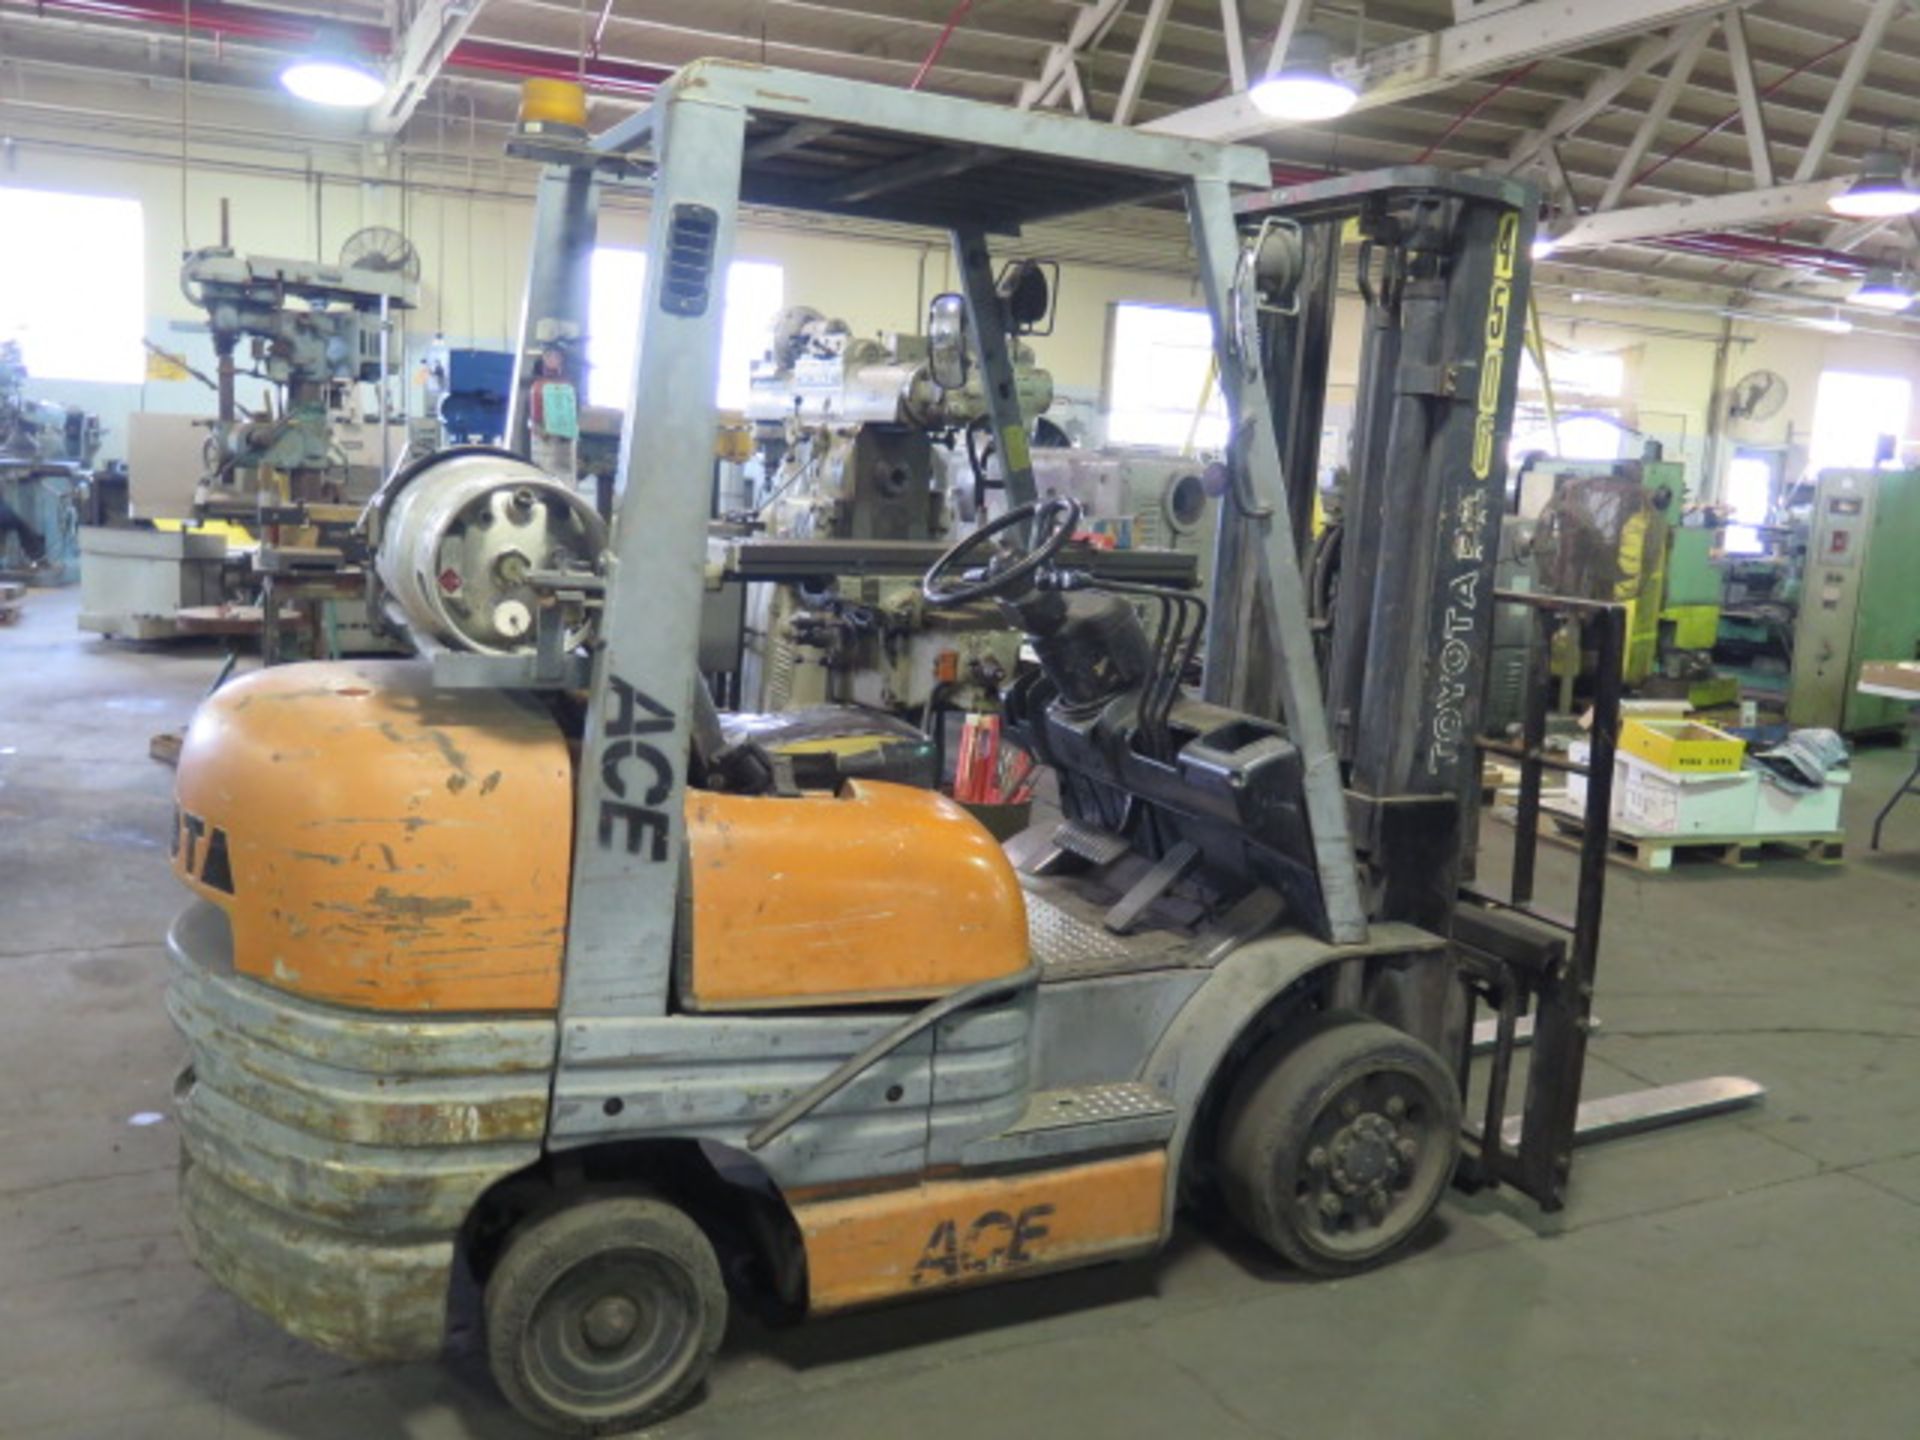 Toyota 42-6FGCU30 6000 Lb Cap LPG Forklift s/n 60775 w/ 2-Stage Mast, 132” Lift Height, SOLD AS IS